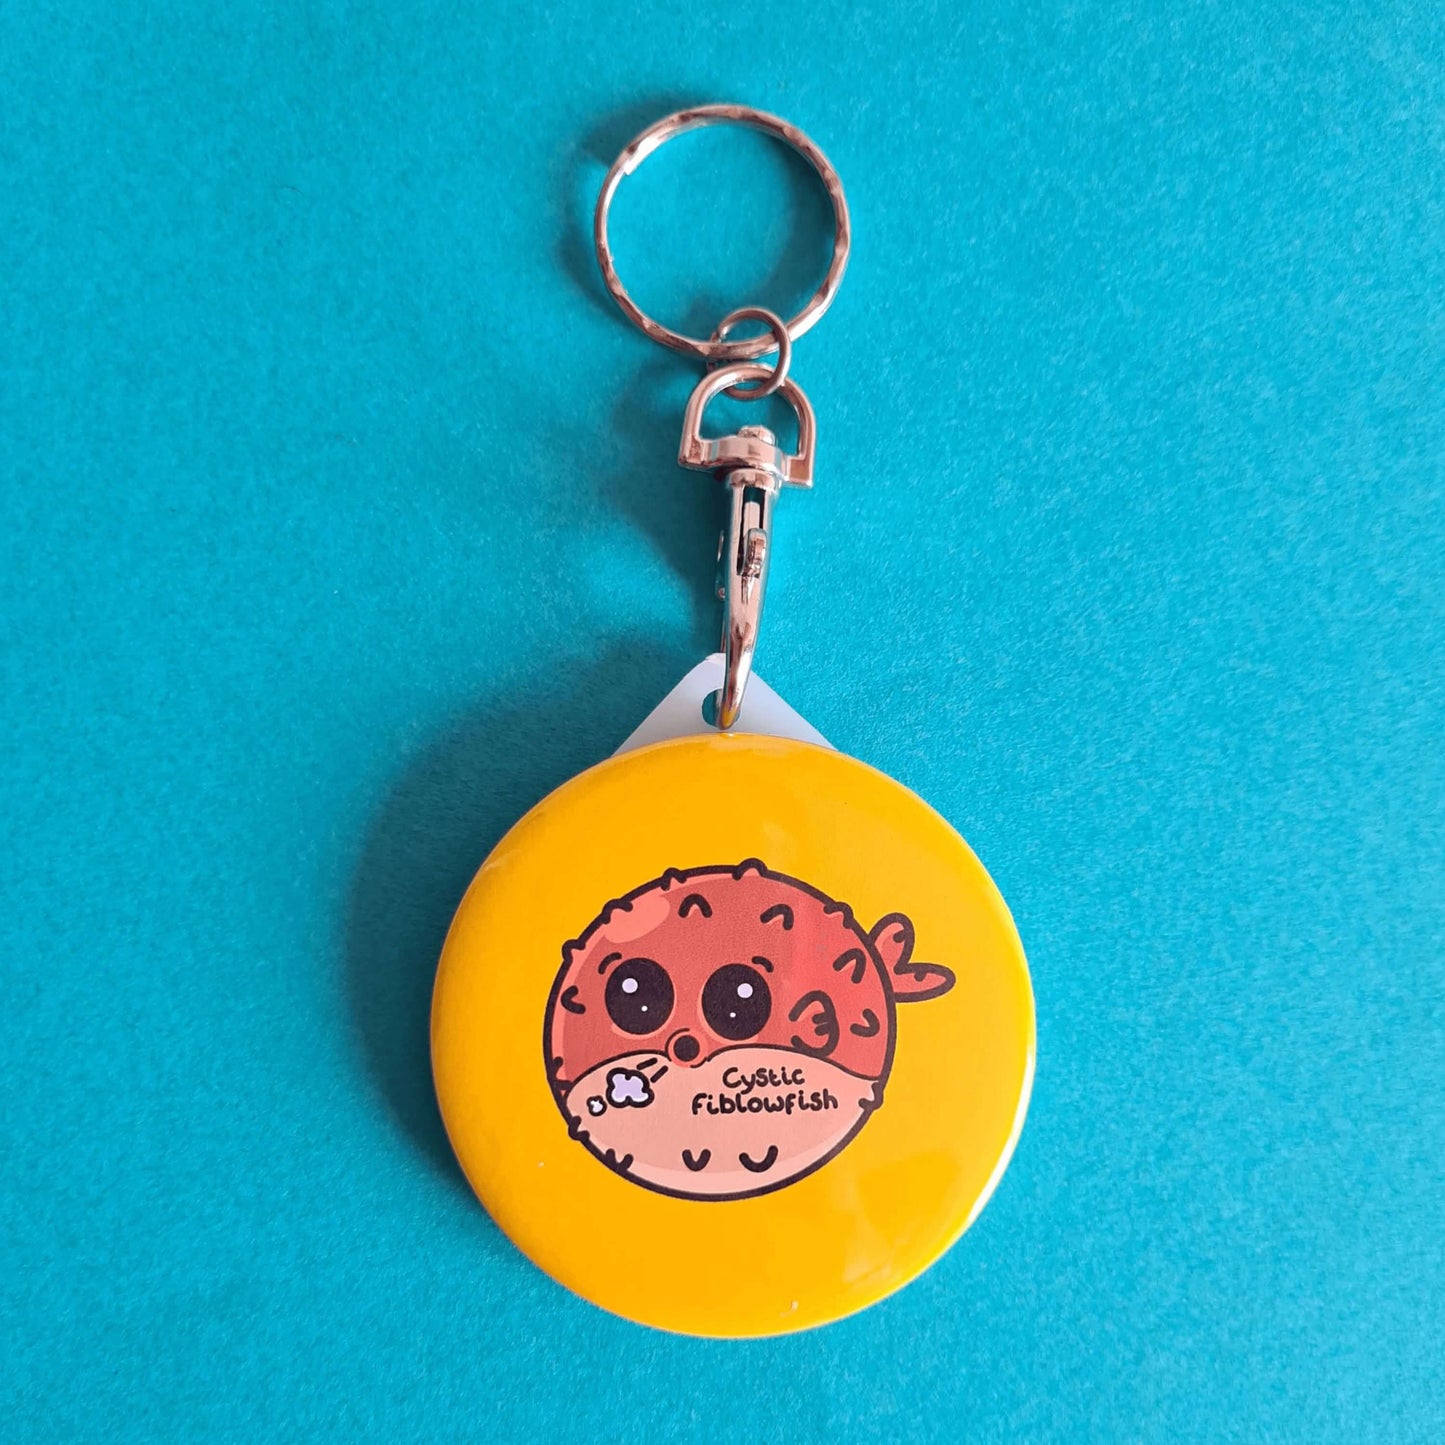 The Cystic Fiblowfish Keyring - Cystic Fibrosis on a blue background. The silver clip plastic yellow circle keychain with a puffer fish blowfish wheezing with 'cystic fiblowfish' written in black on its belly. The design is raising awareness for cystic fibrosis.